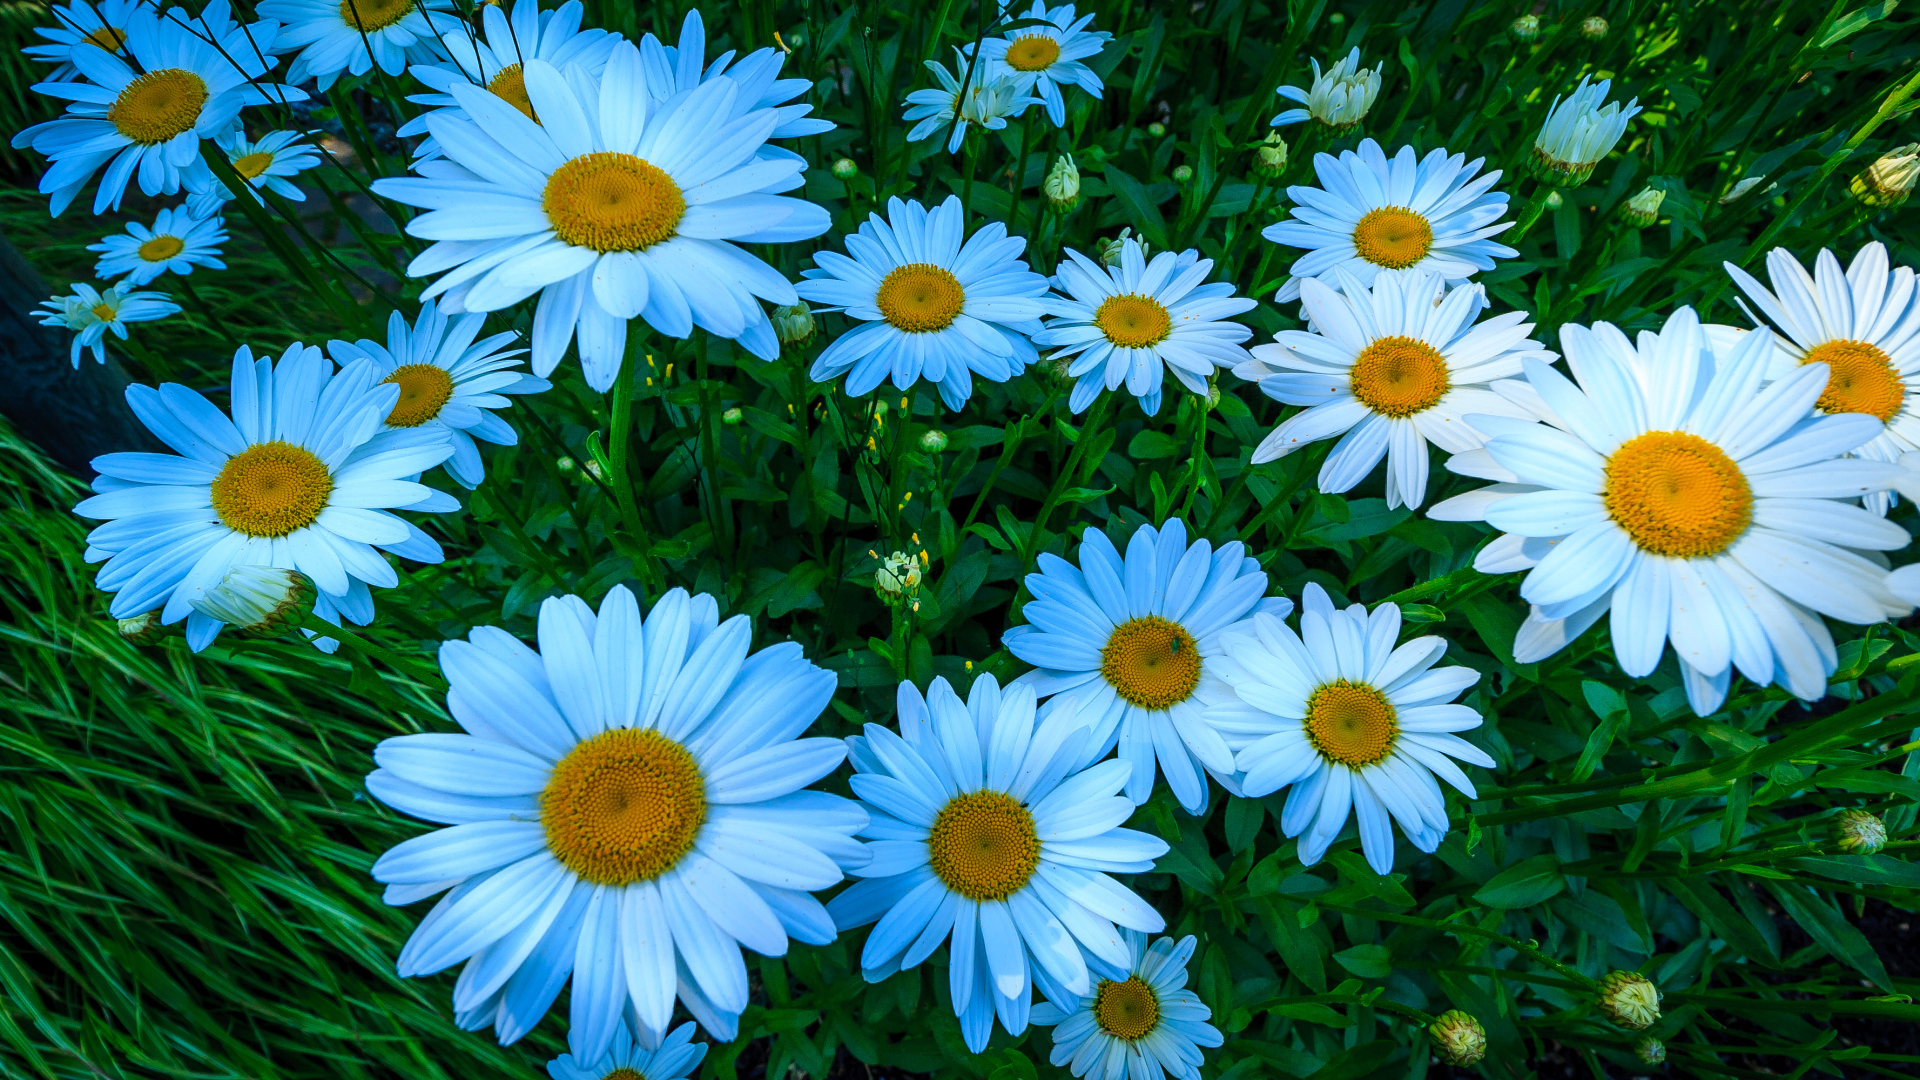 Beautiful white daisy flowers on a flower bed